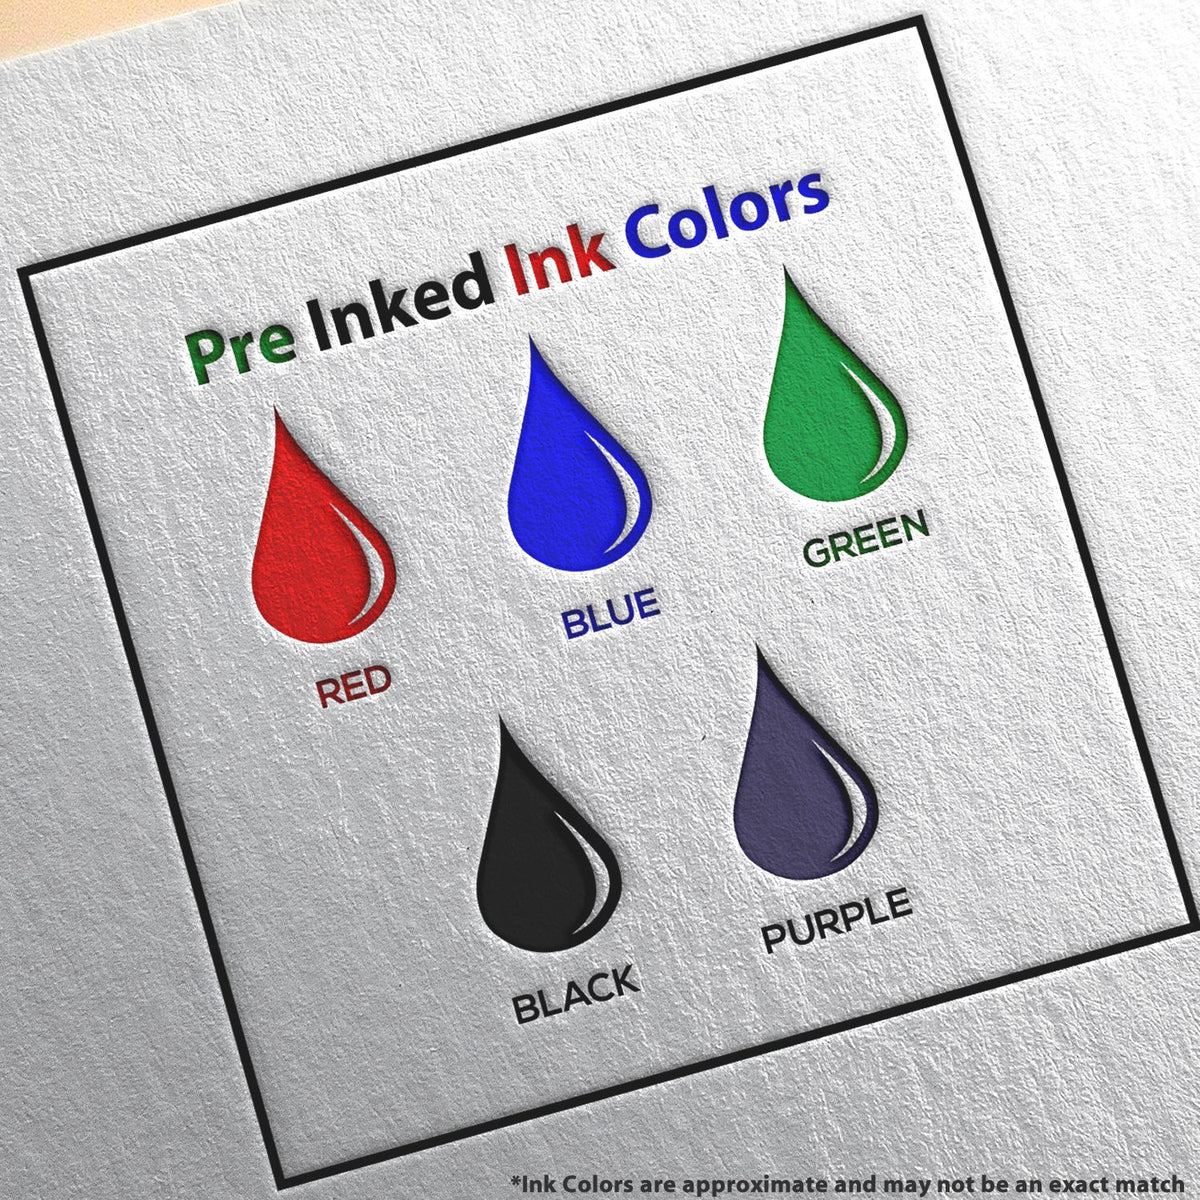 A picture showing the different ink colors or hues available for the Slim Pre-Inked Maine Professional Engineer Seal Stamp product.